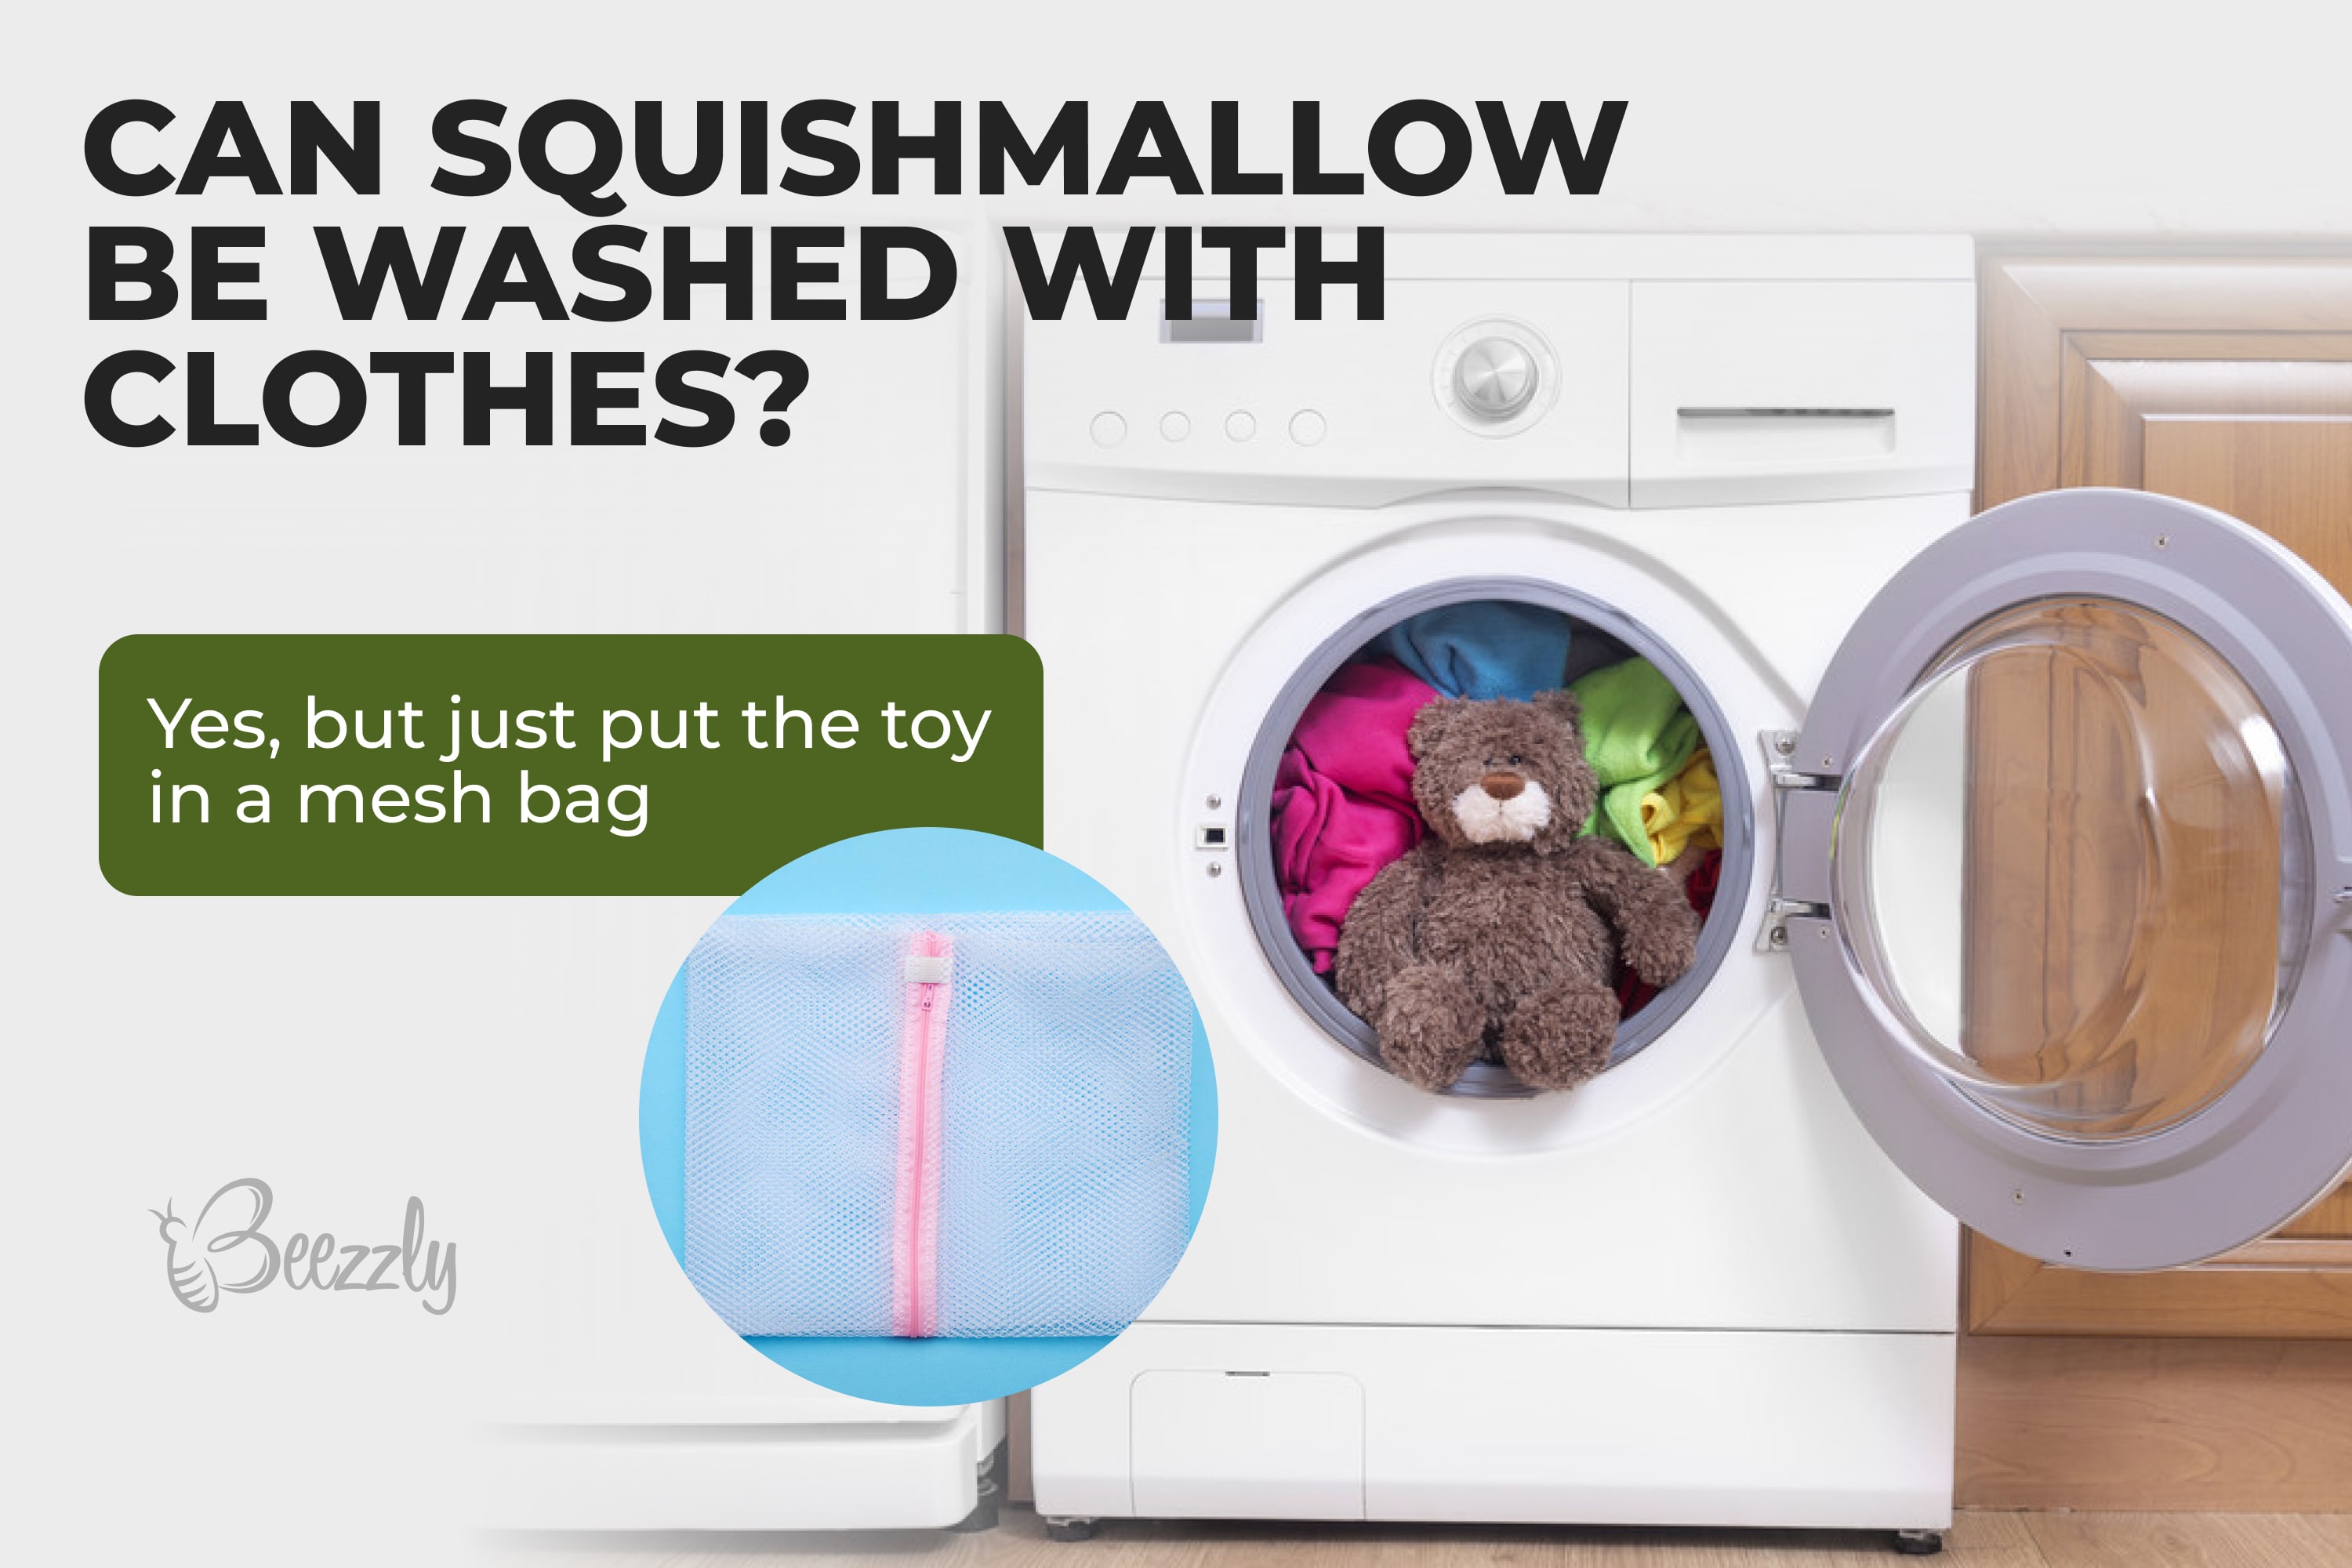 Can Squishmallow be washed with clothes